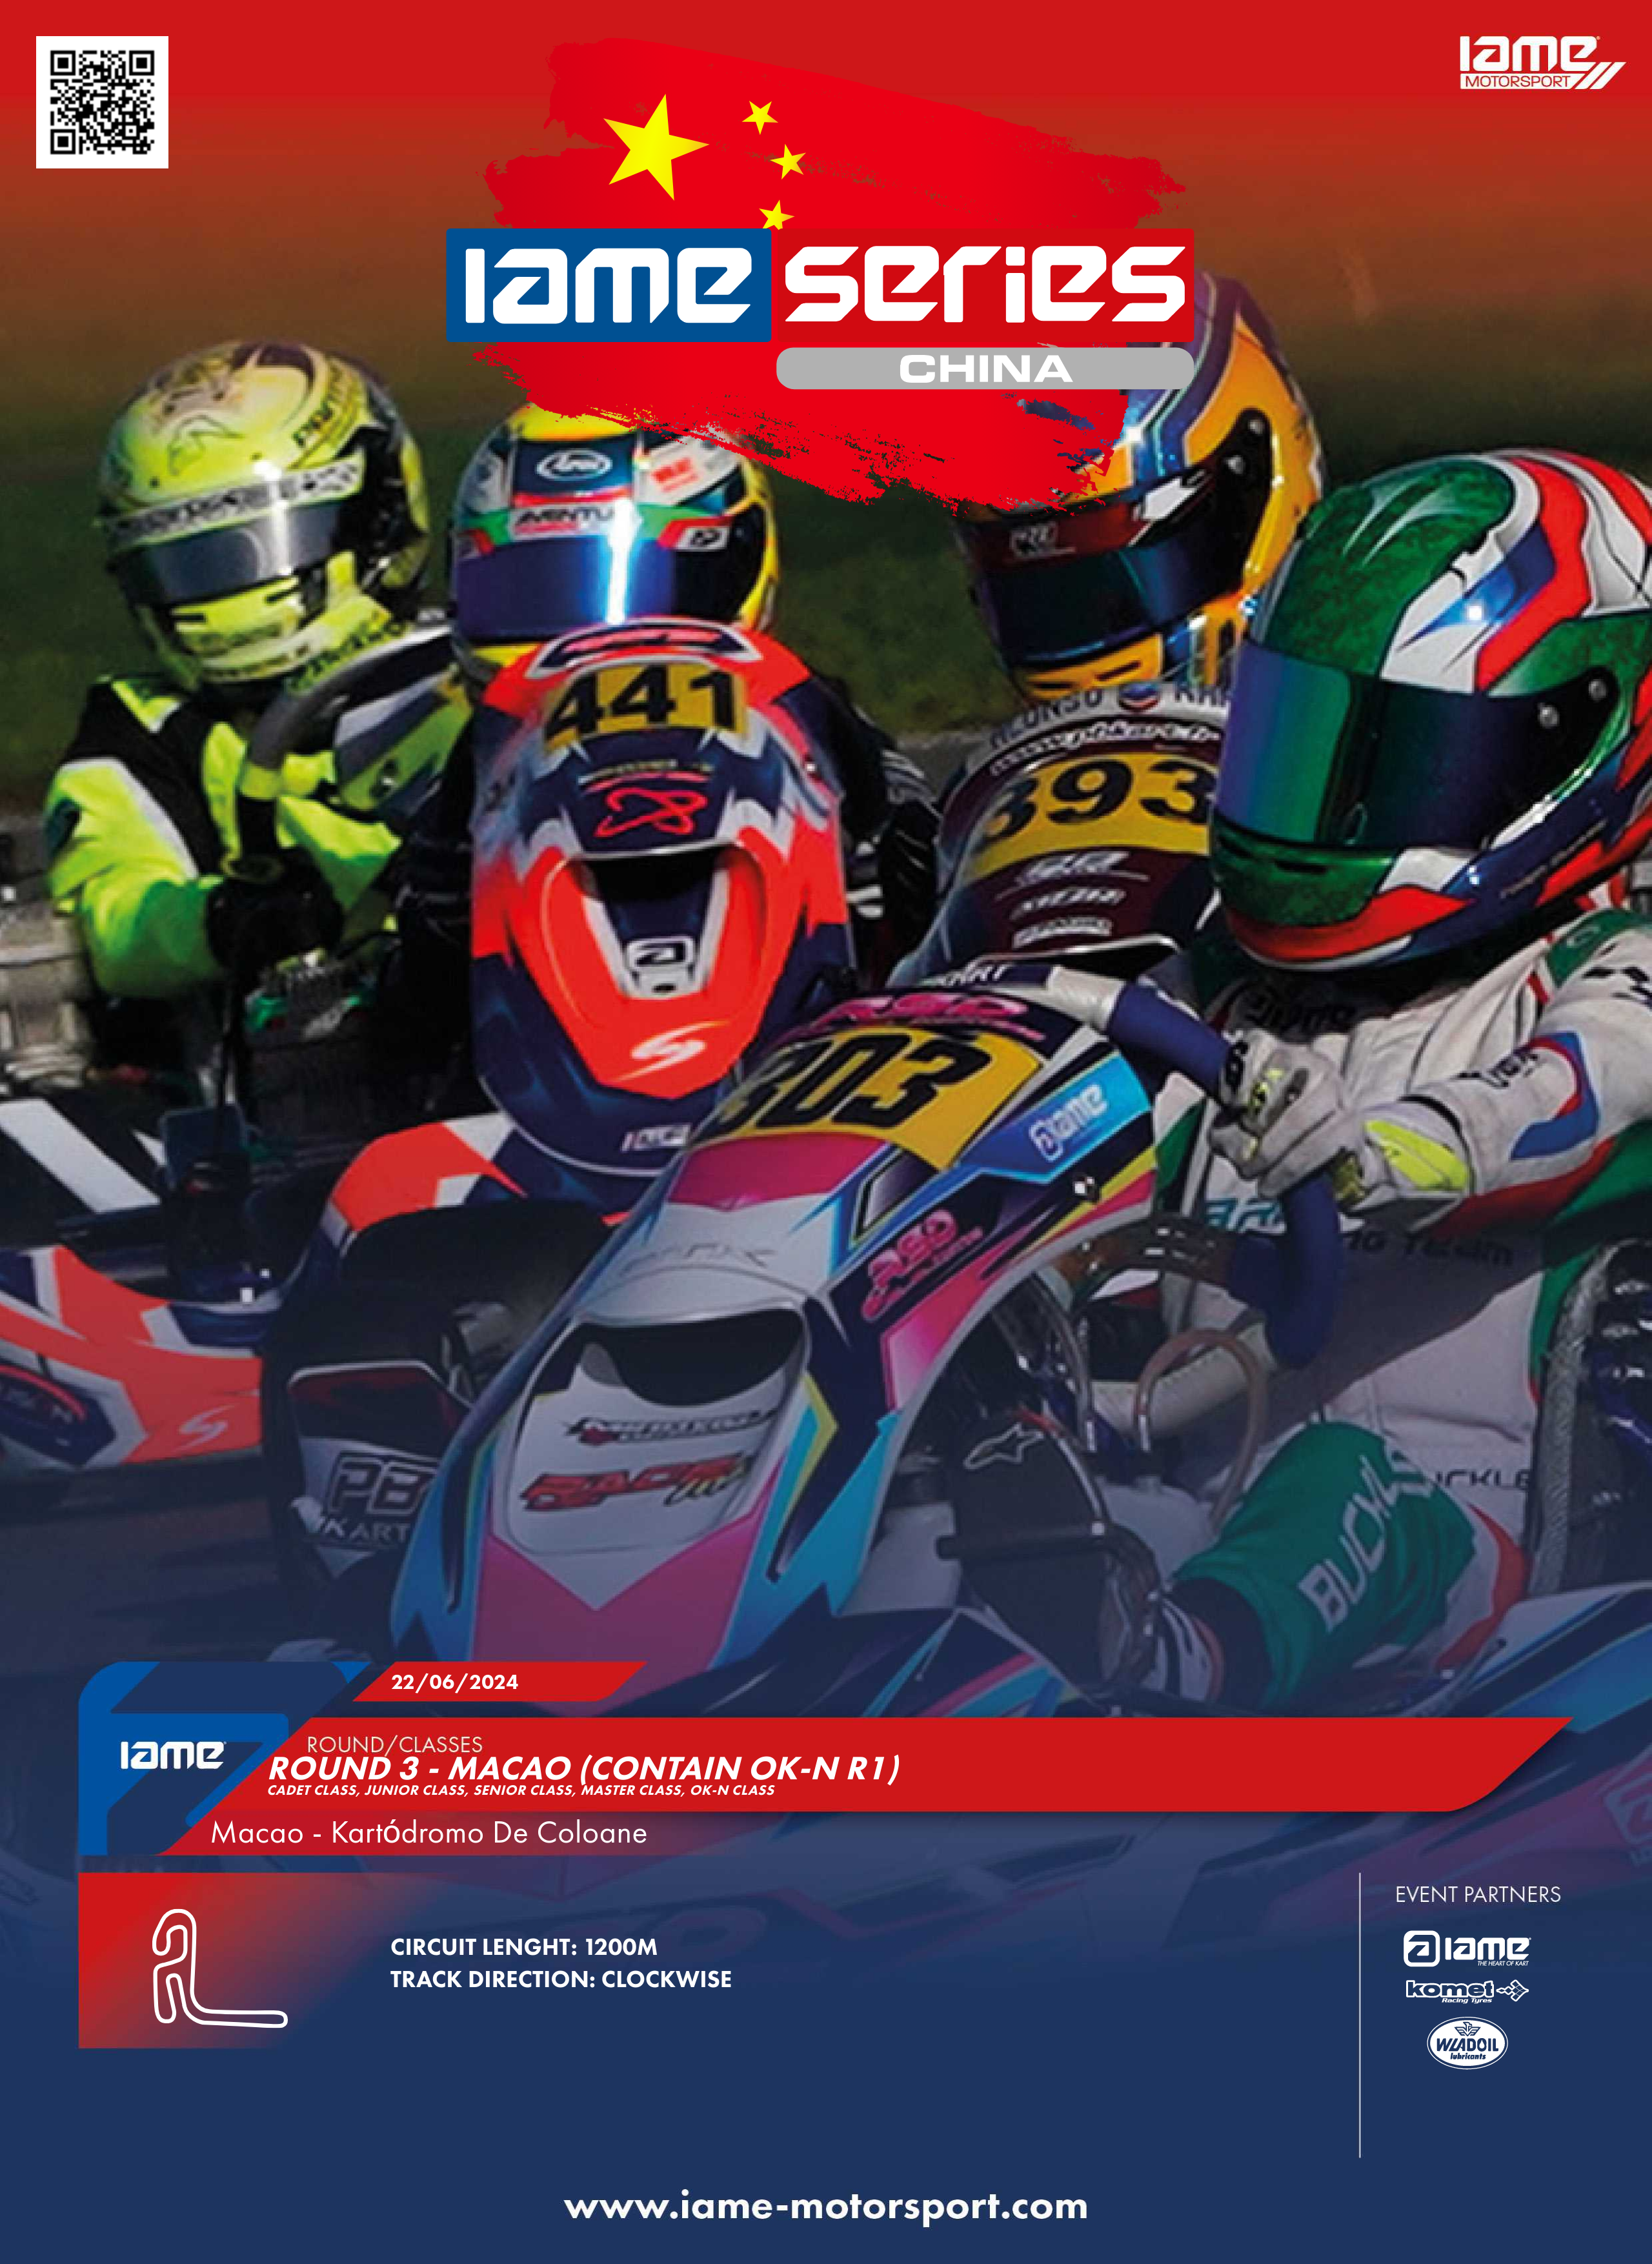 Get Ready for Round 3 of the IAME Series China in Macao: OK-N R1 Awaits!